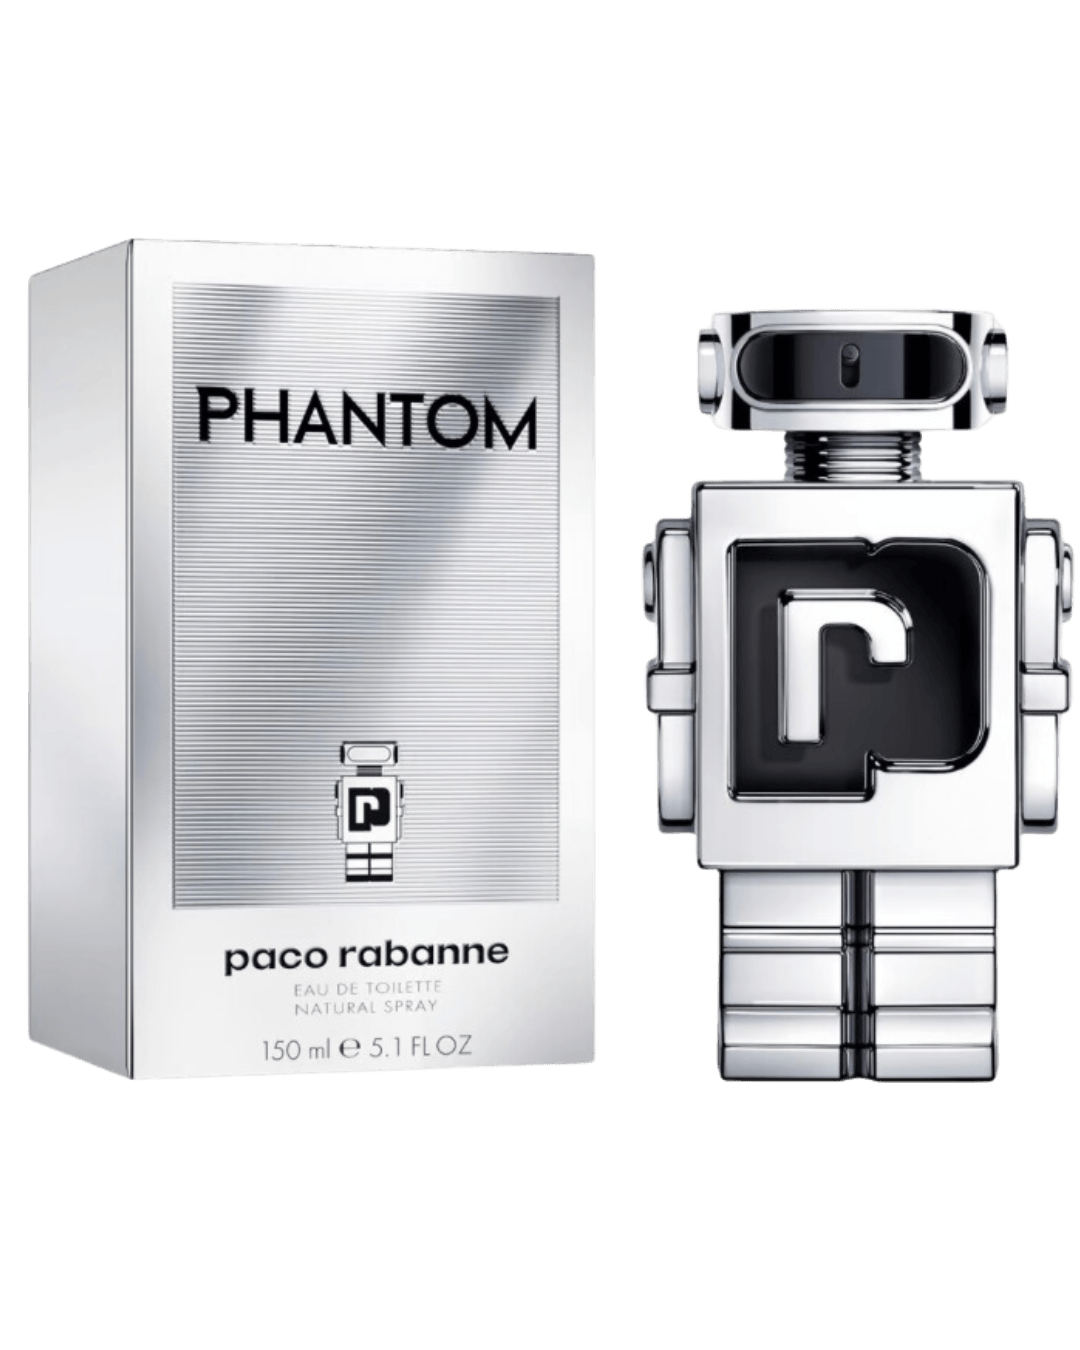 Daily Vanity Beauty Awards 2024 Best Body care Rabanne Fragrance &#8211; Rabanne Phantom Parfum Voted By Beauty Experts